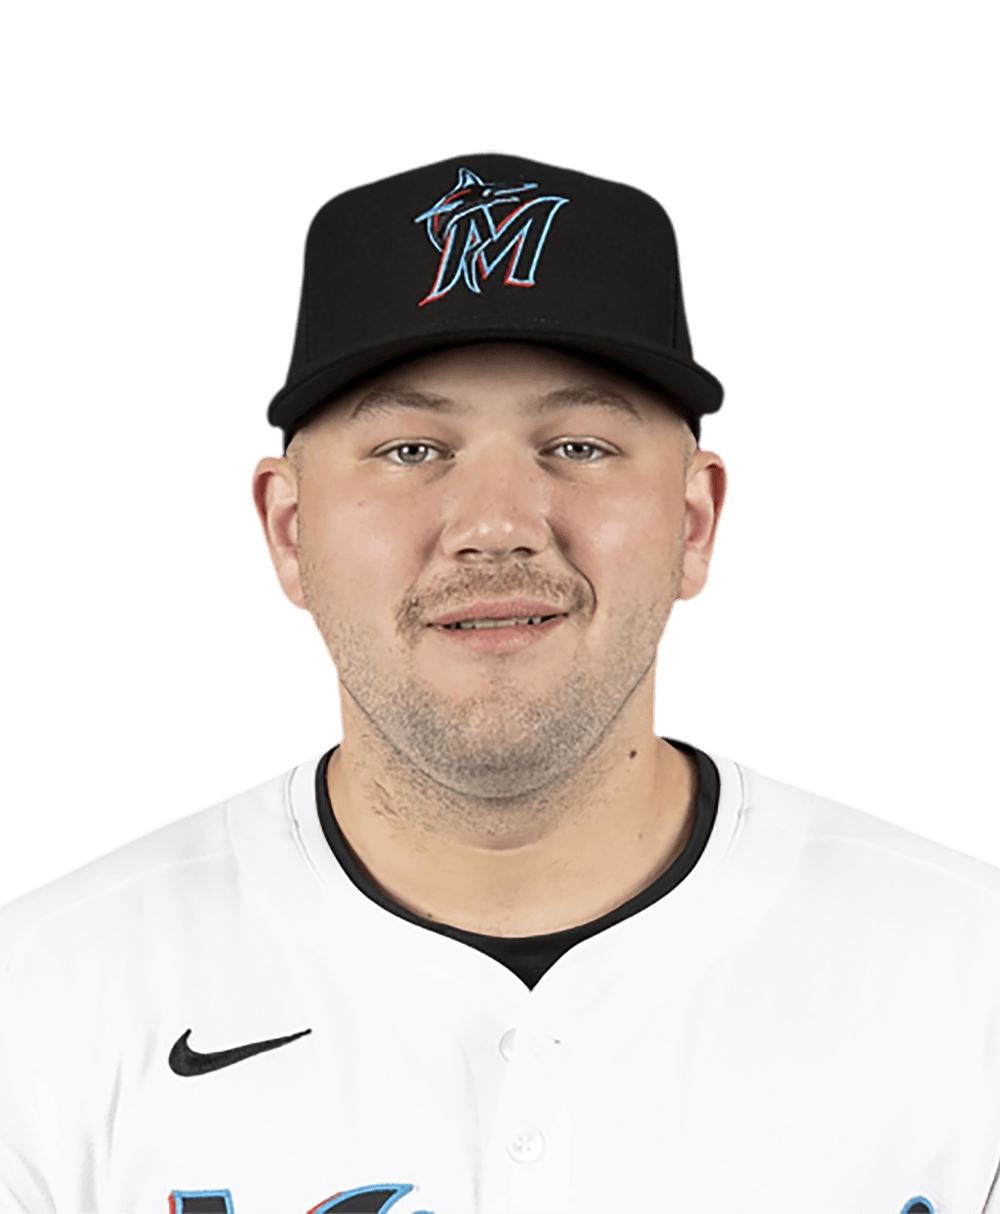 Homers from Burger and Chisholm in 8th lift Marlins to 11-5 win over Braves